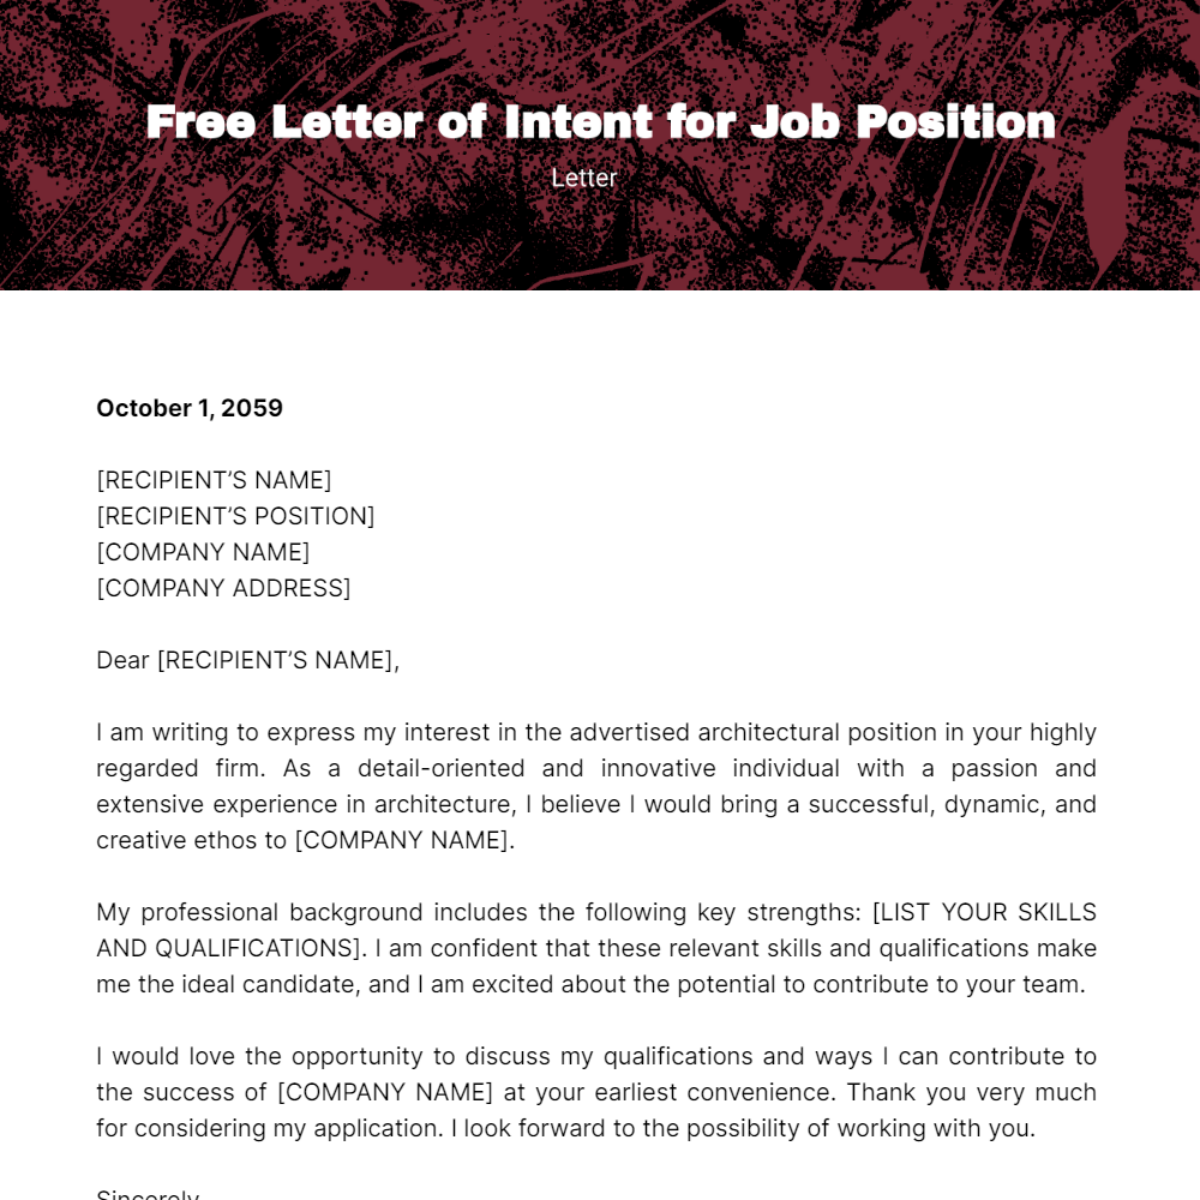 Letter of Intent for Job Position Template